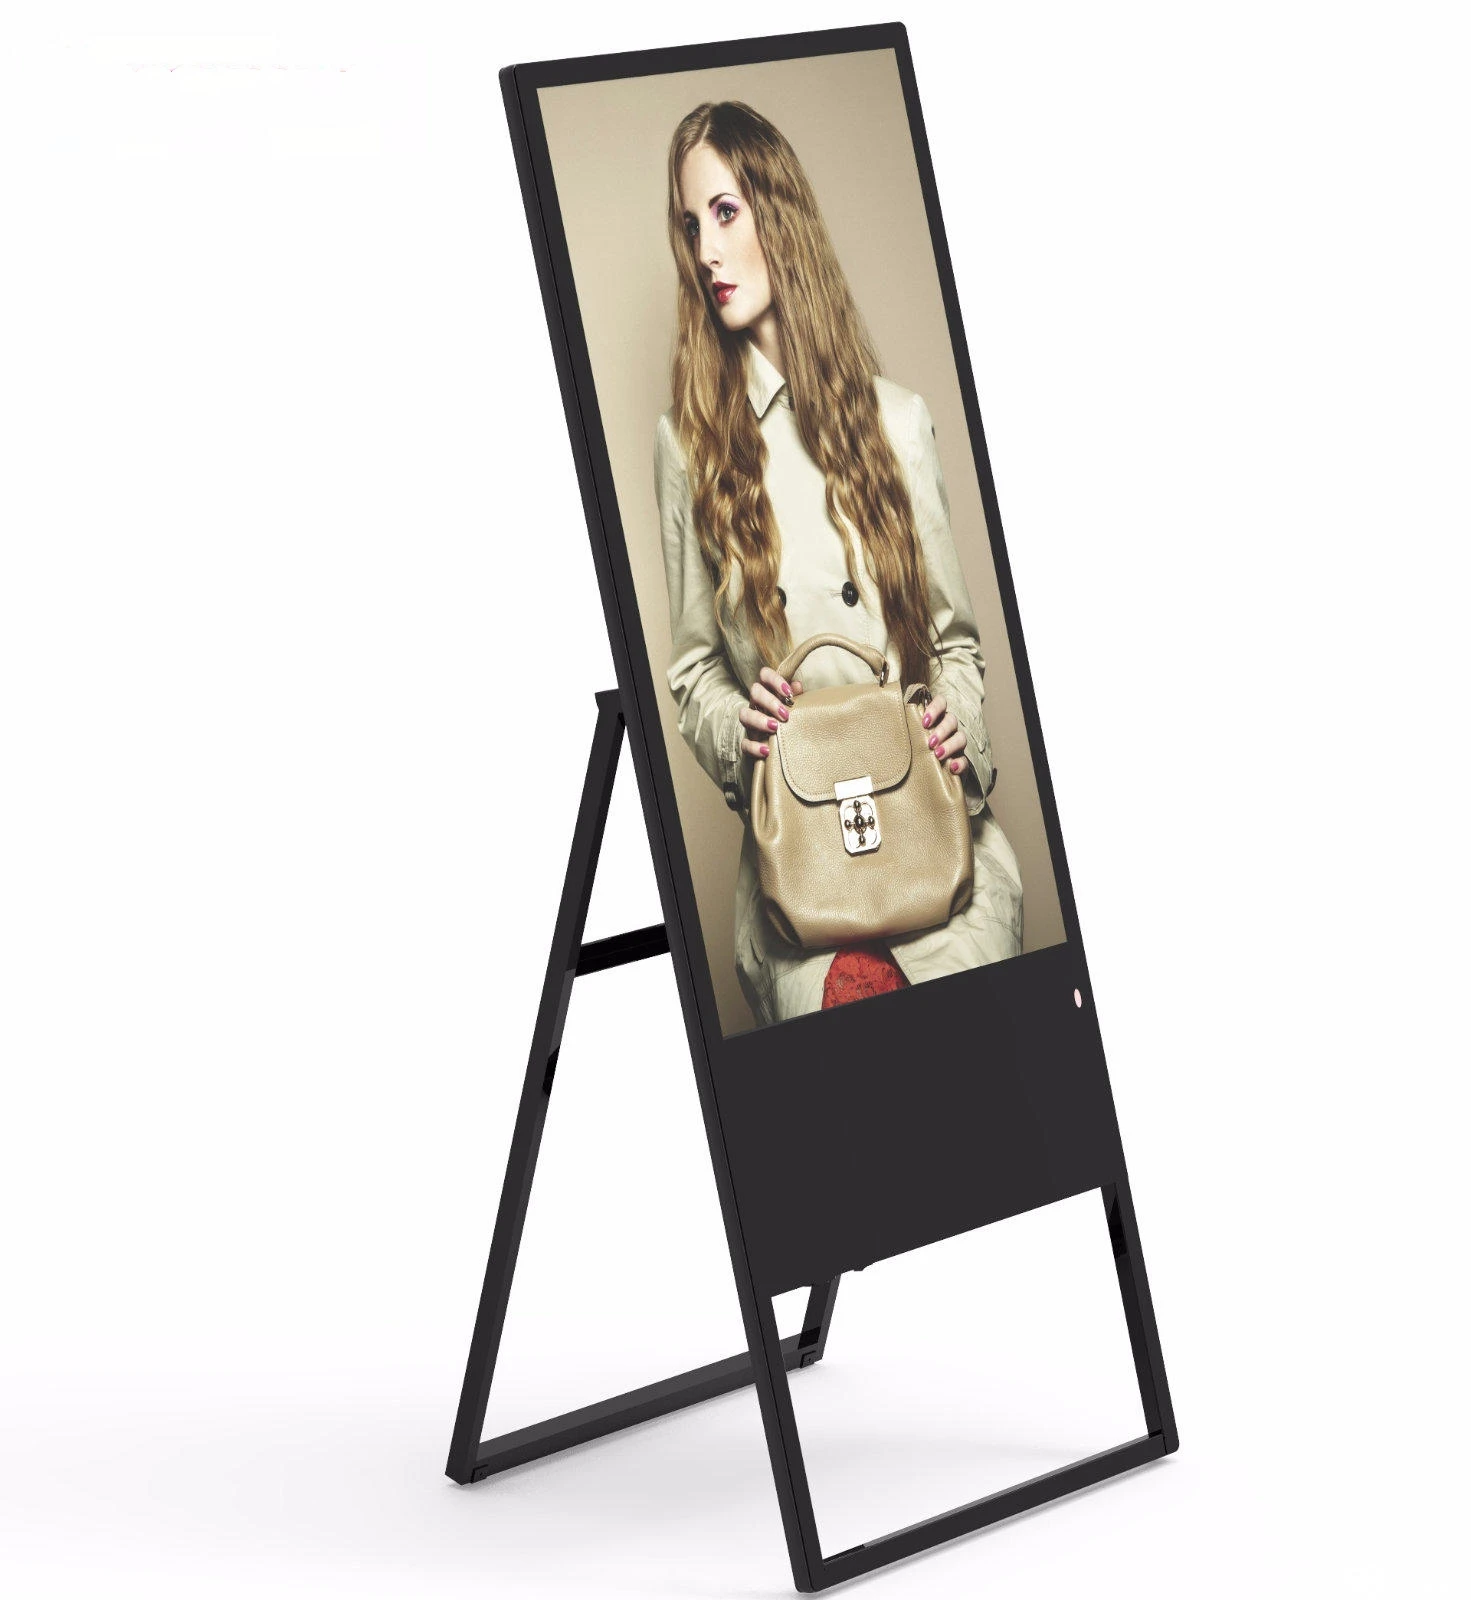 2018 New Type 43 inch floor standing portable digital signage lcd advertising display